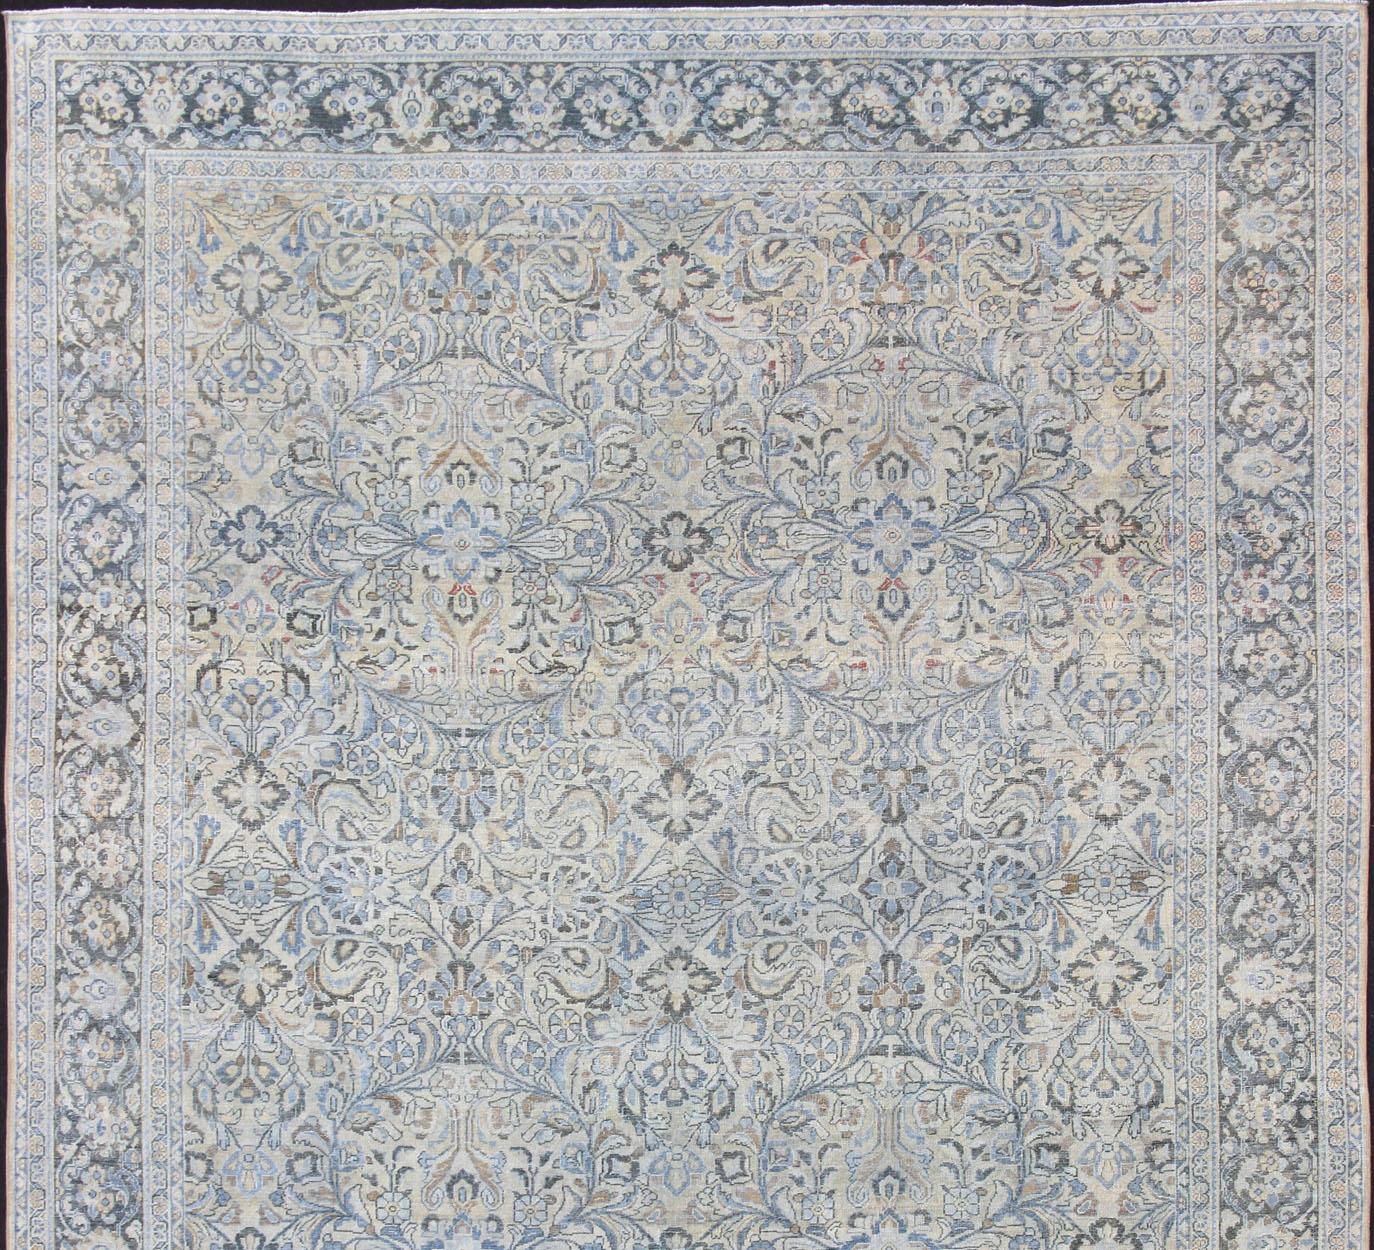 Cream, charcoal, blue, charcoal and light brown and blue antique Persian Mahal rug with sub-floral all over design, rug / SUS-2009-662, country of origin / type: Iran / Mahal, circa 1920
This antique Persian Mahal rug, circa early 20th century,